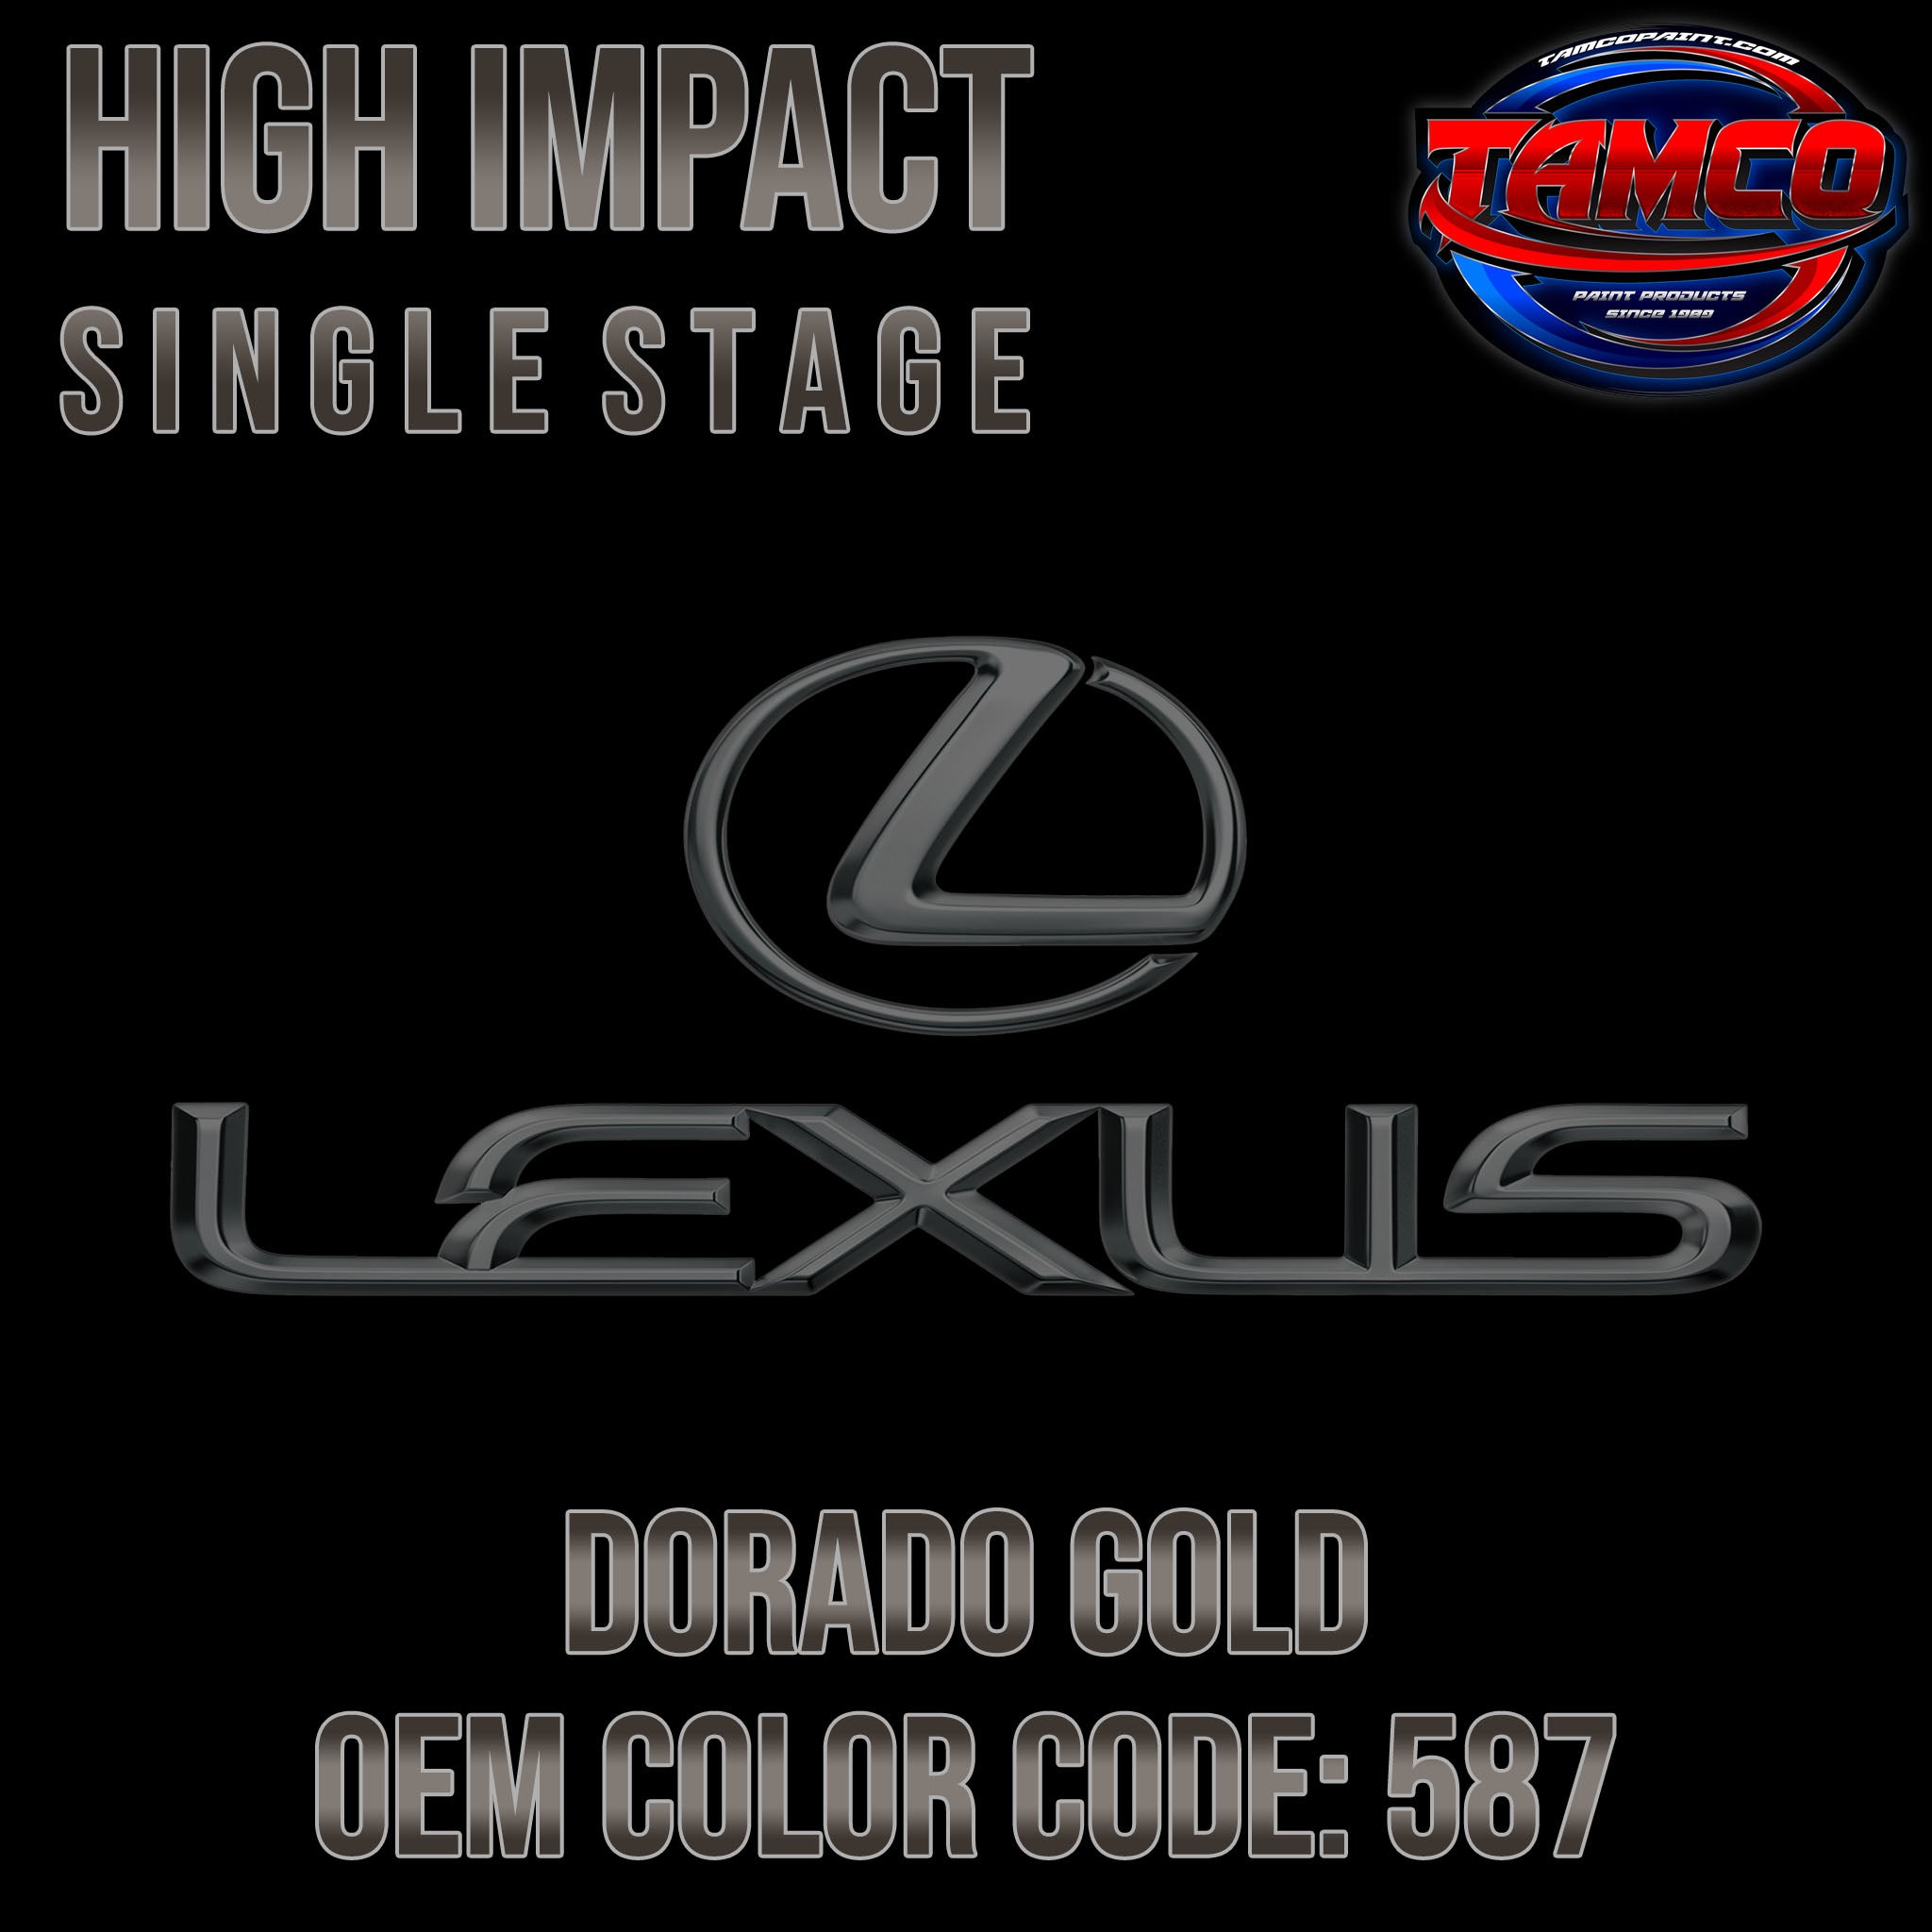 For Toyota (587 Dorado Gold Pearl) Touch Up or Spray Paint